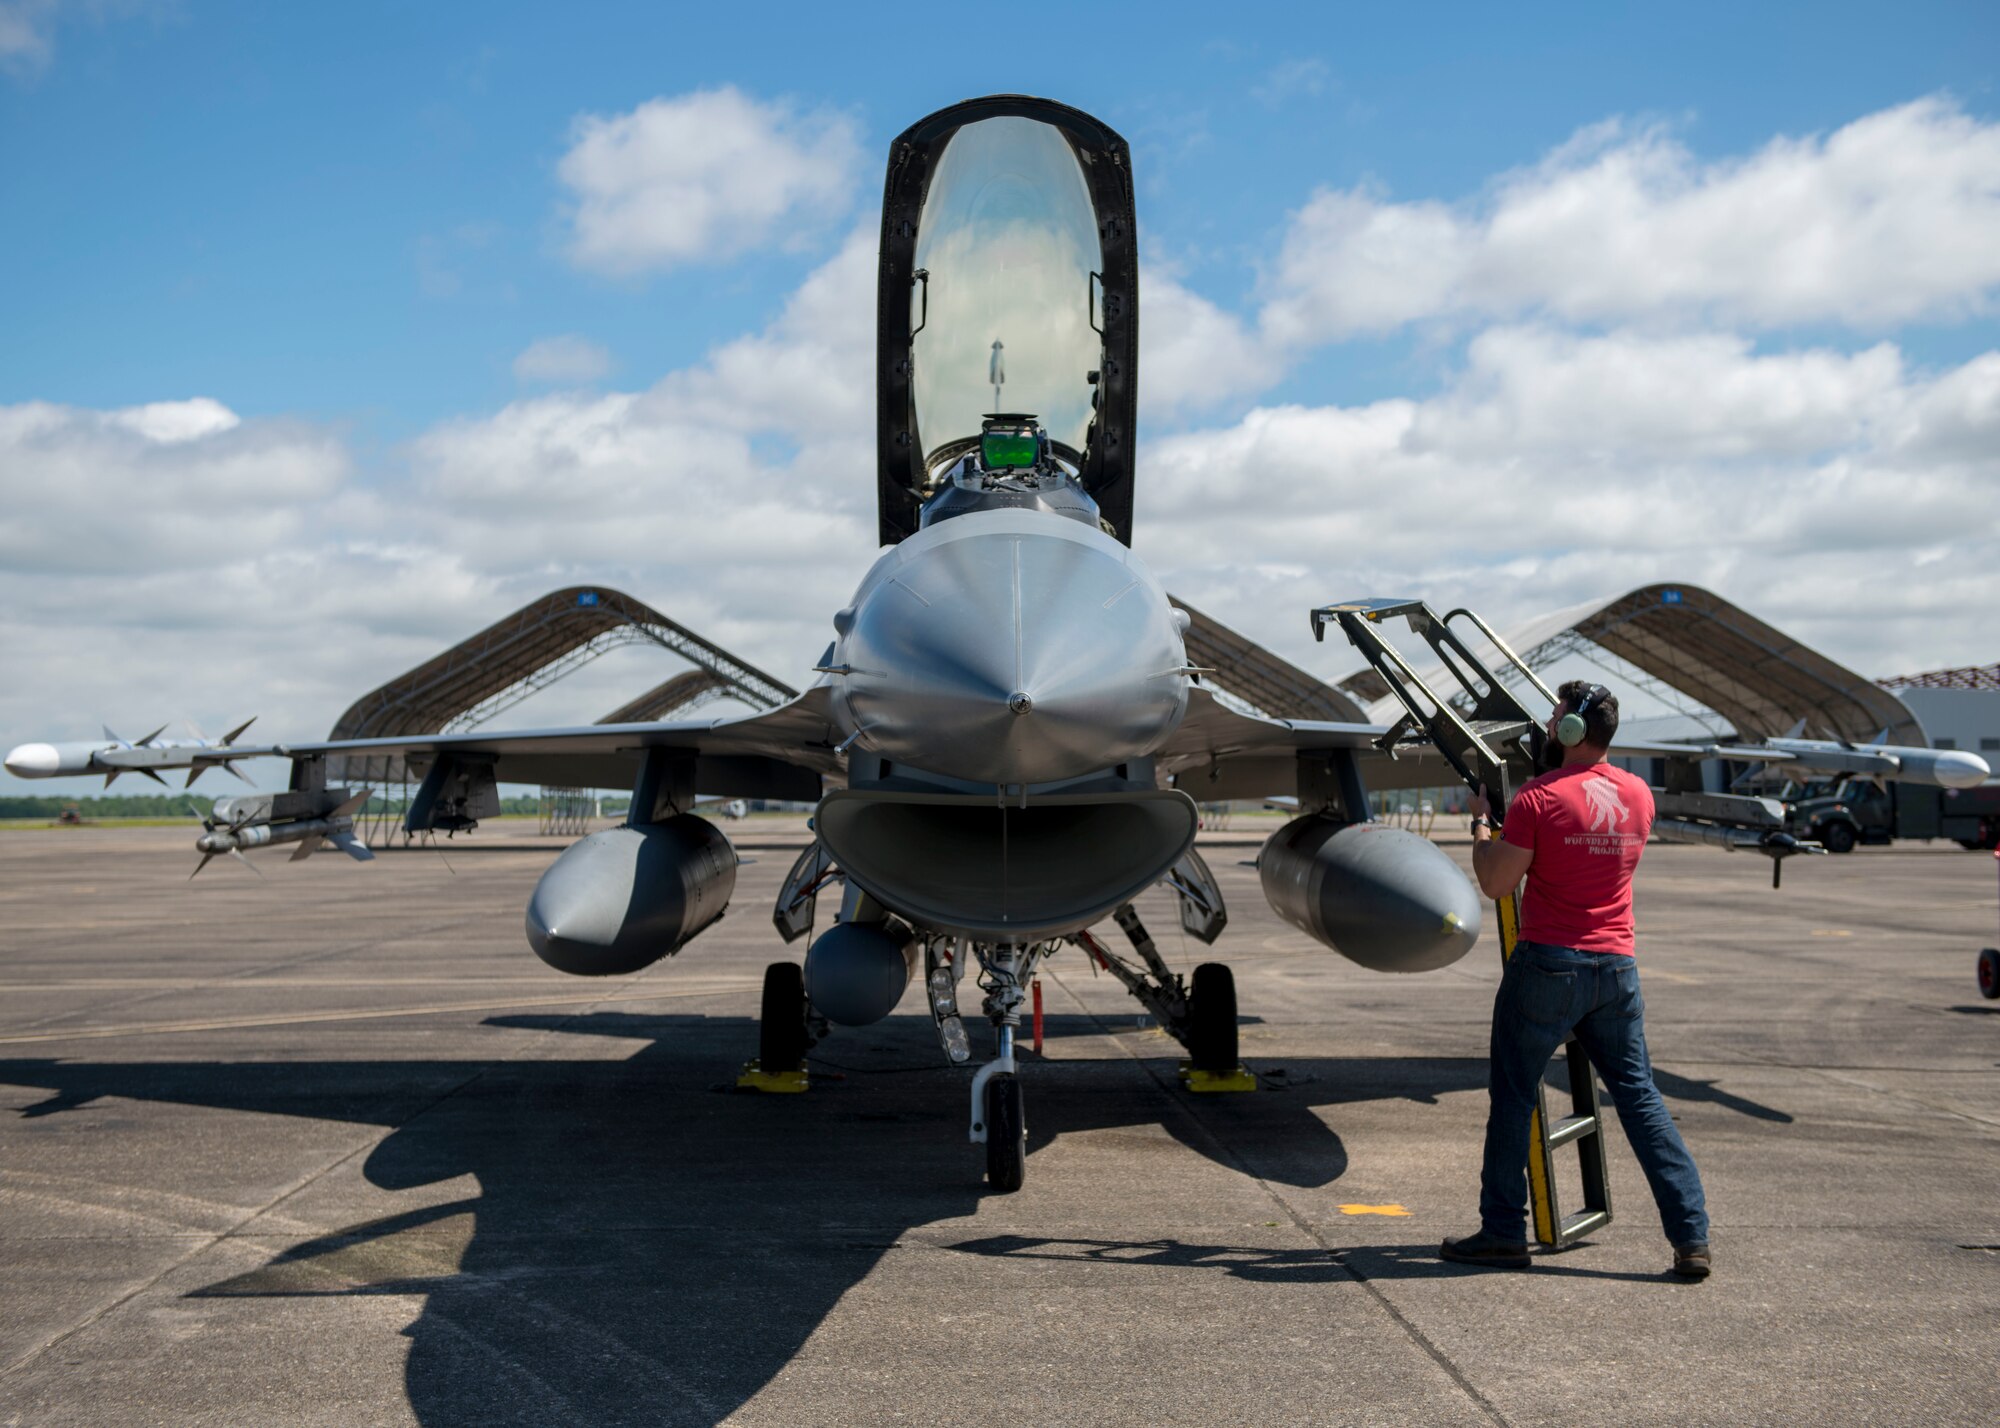 An 8th Fighter Squadron maintainer brings a ladder to an F-16 Fighting Falcon pilot, April 9, 2019, on Naval Air Station Joint Reserve Base New Orleans, La. Of the 158 personnel that came on the temporary duty assignment, 106 were F-16 maintainers. (U.S. Air Force photo by Airman 1st Class Kindra Stewart)